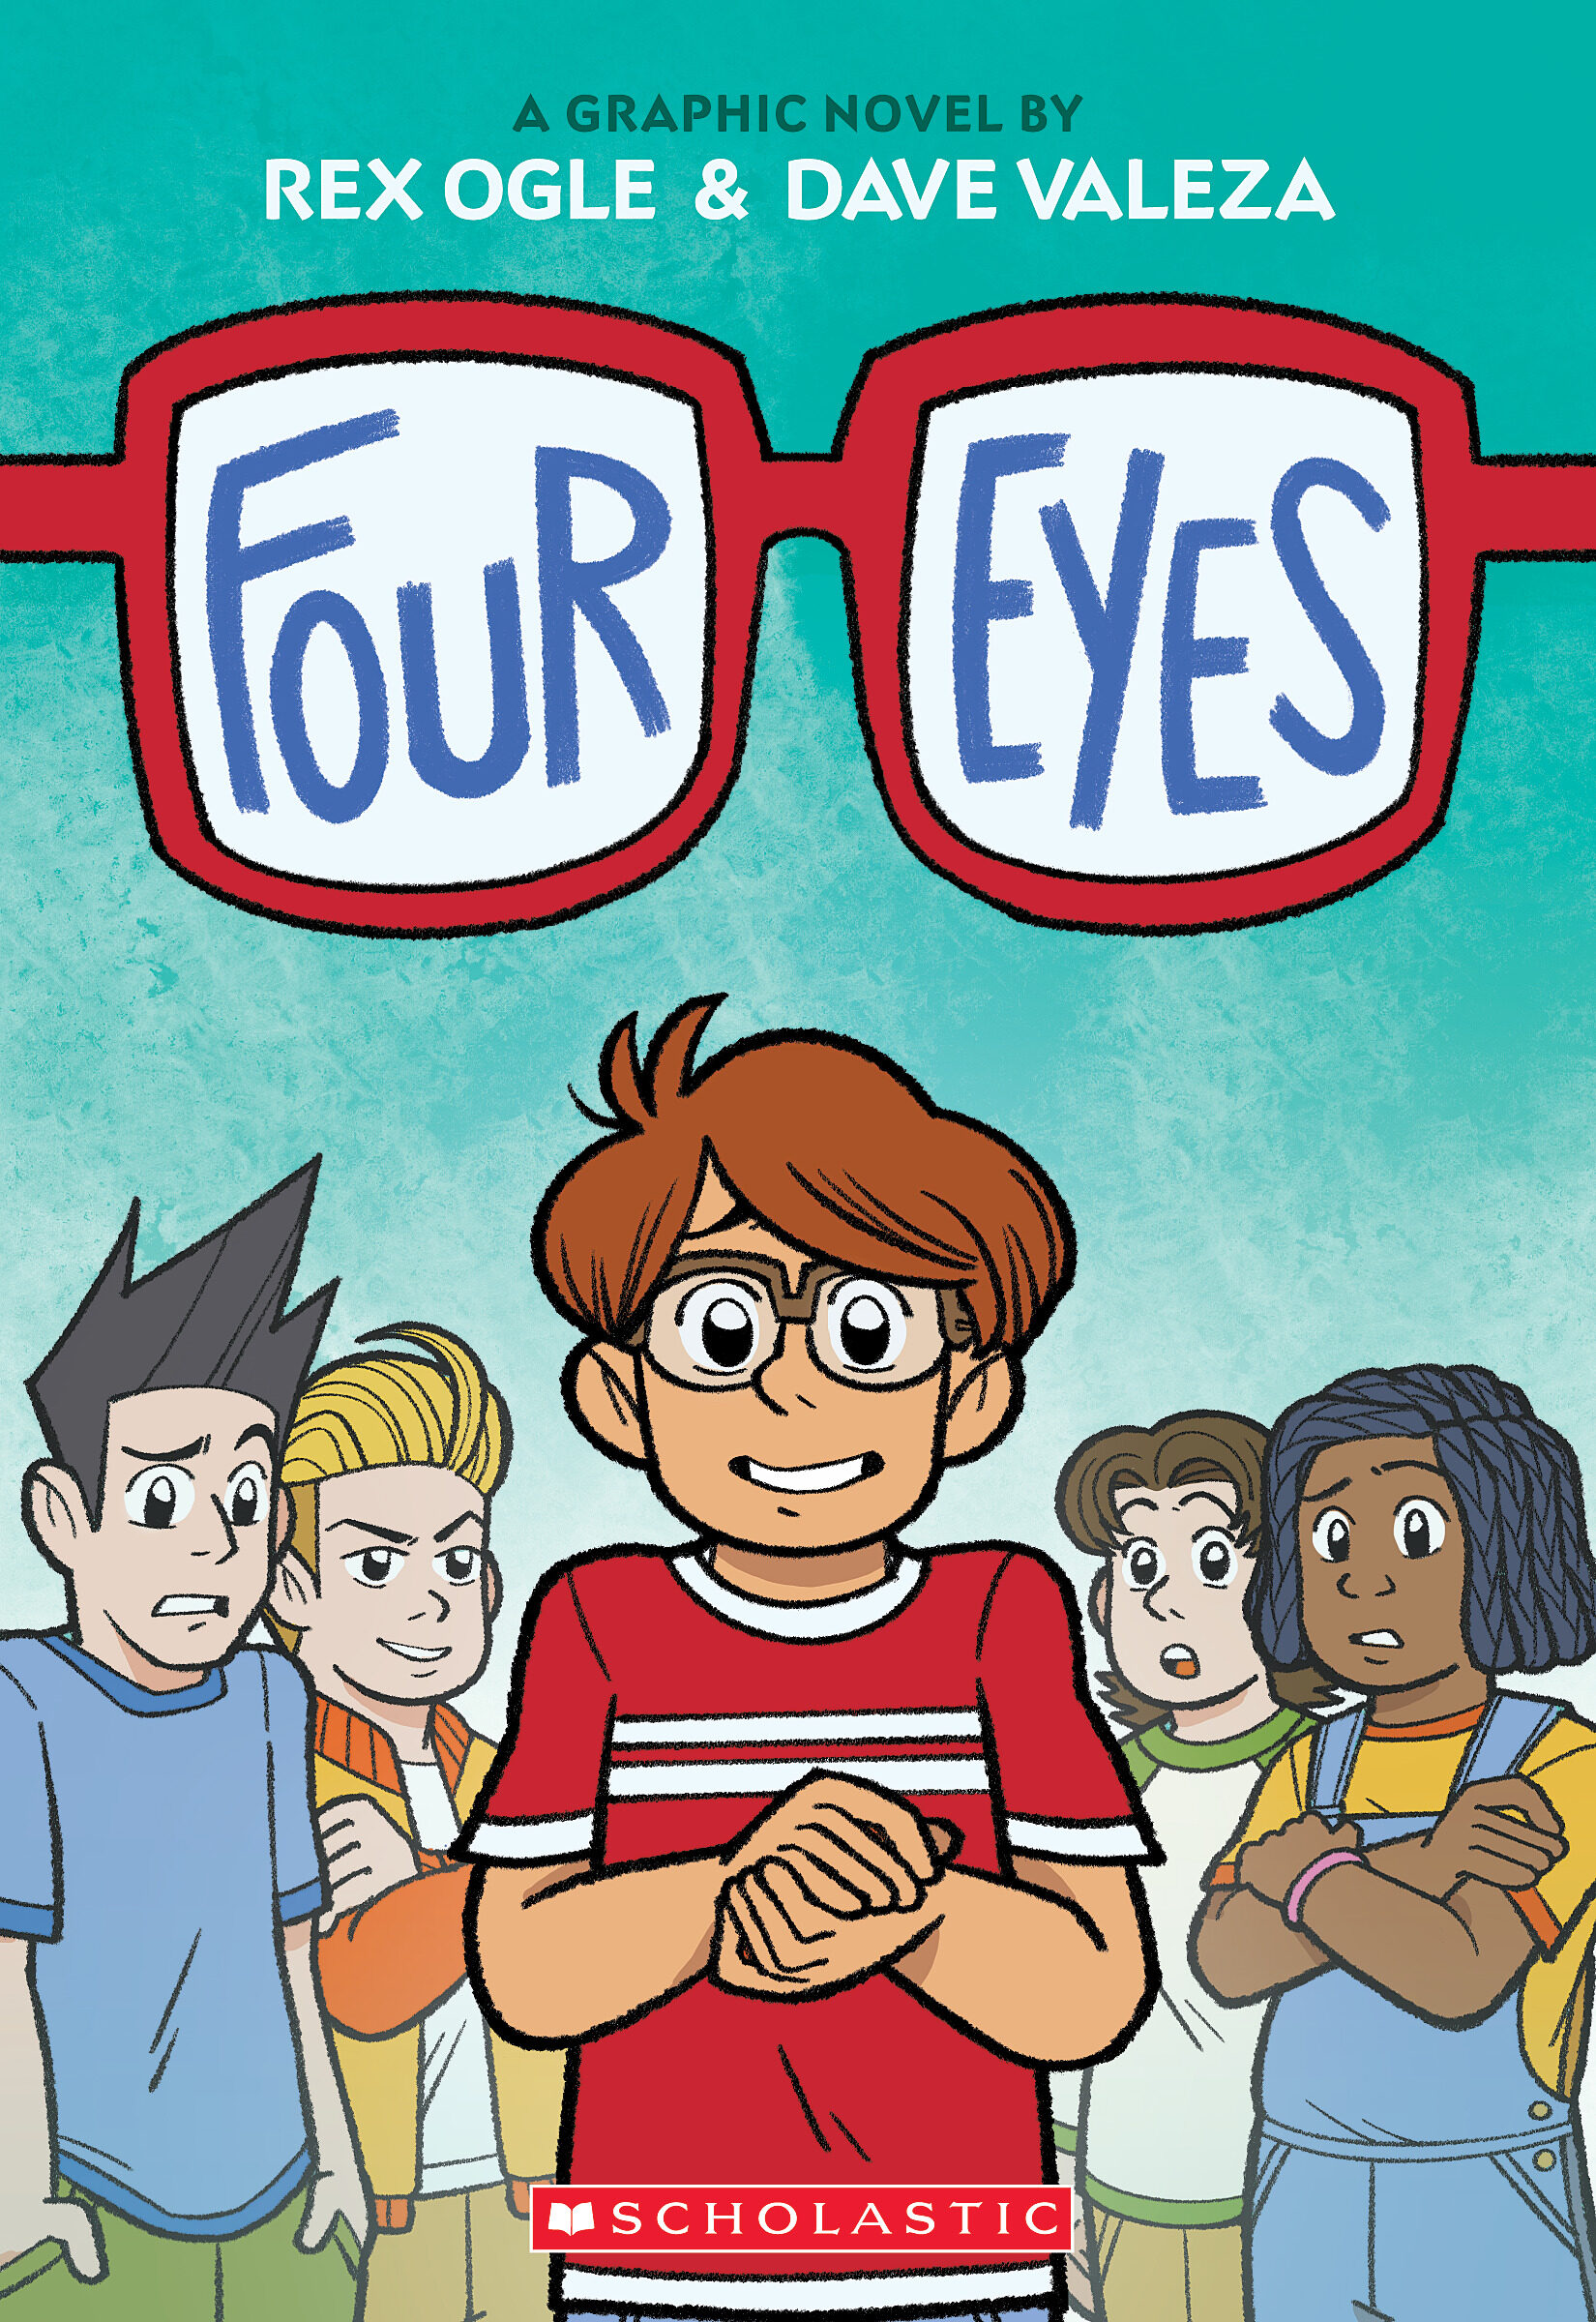 Image for "Four Eyes: a Graphic Novel (Four Eyes #1)"